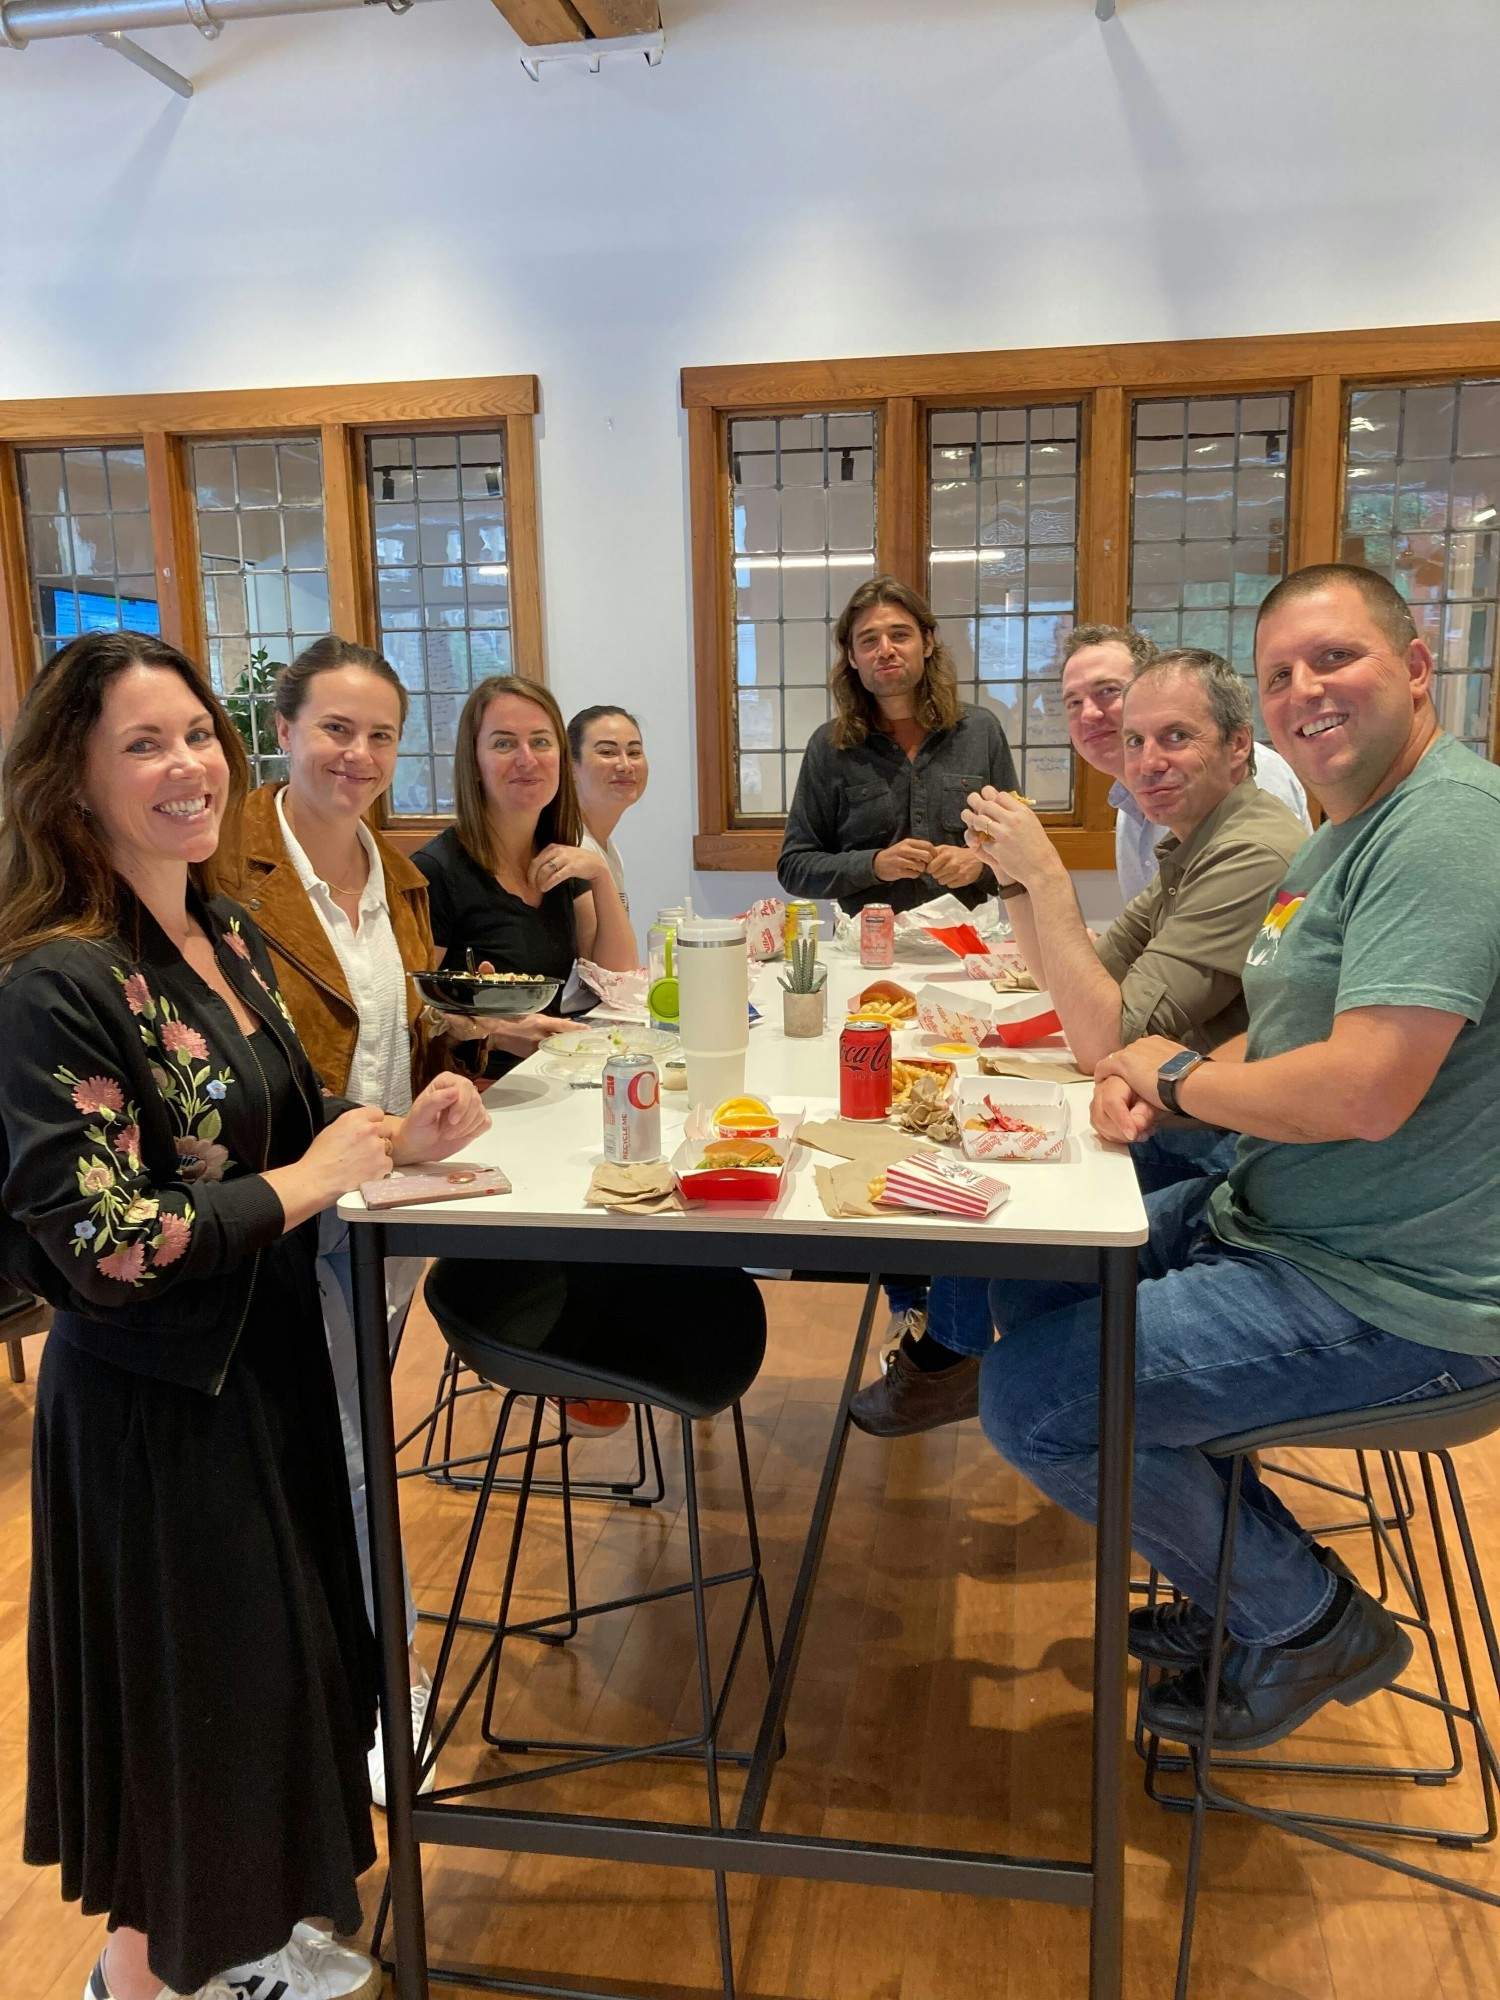 Members of our Executive team enjoying lunch at our Chicago office!